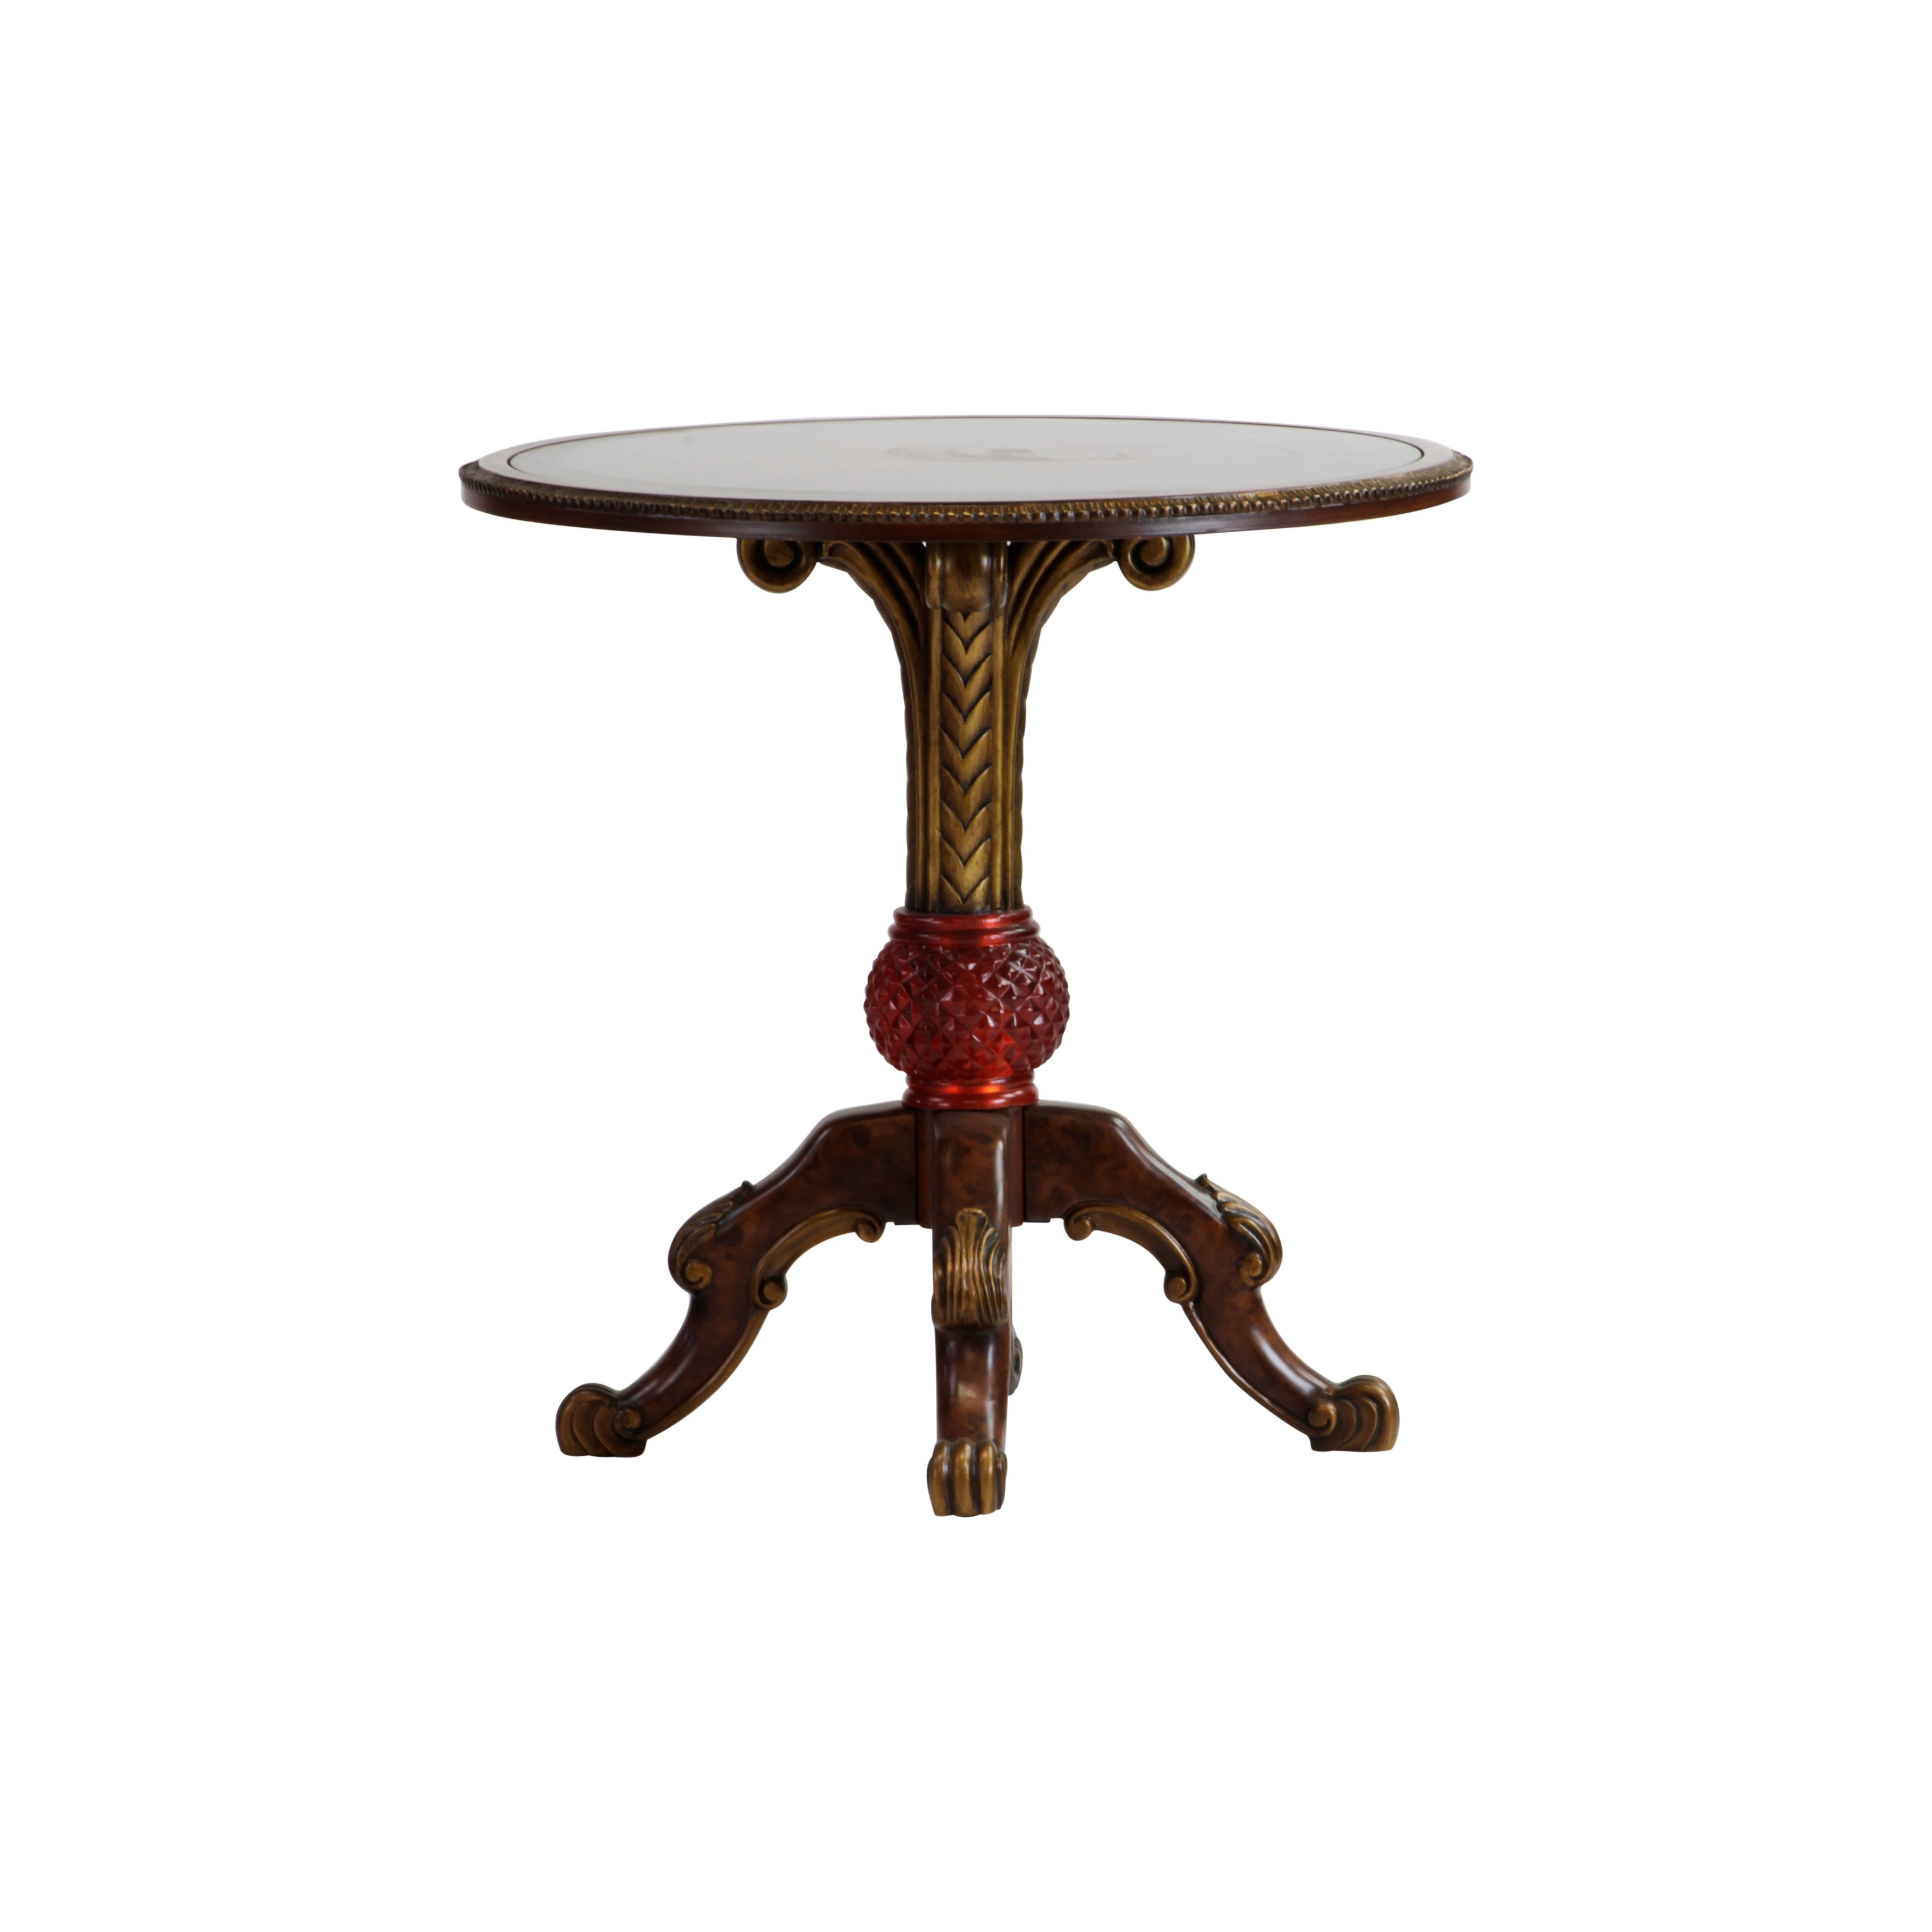 murano italian hand painted glass art round accent table free vanity wood shipping today outdoor folding end very narrow hall inexpensive console dale tiffany ceiling lamps big